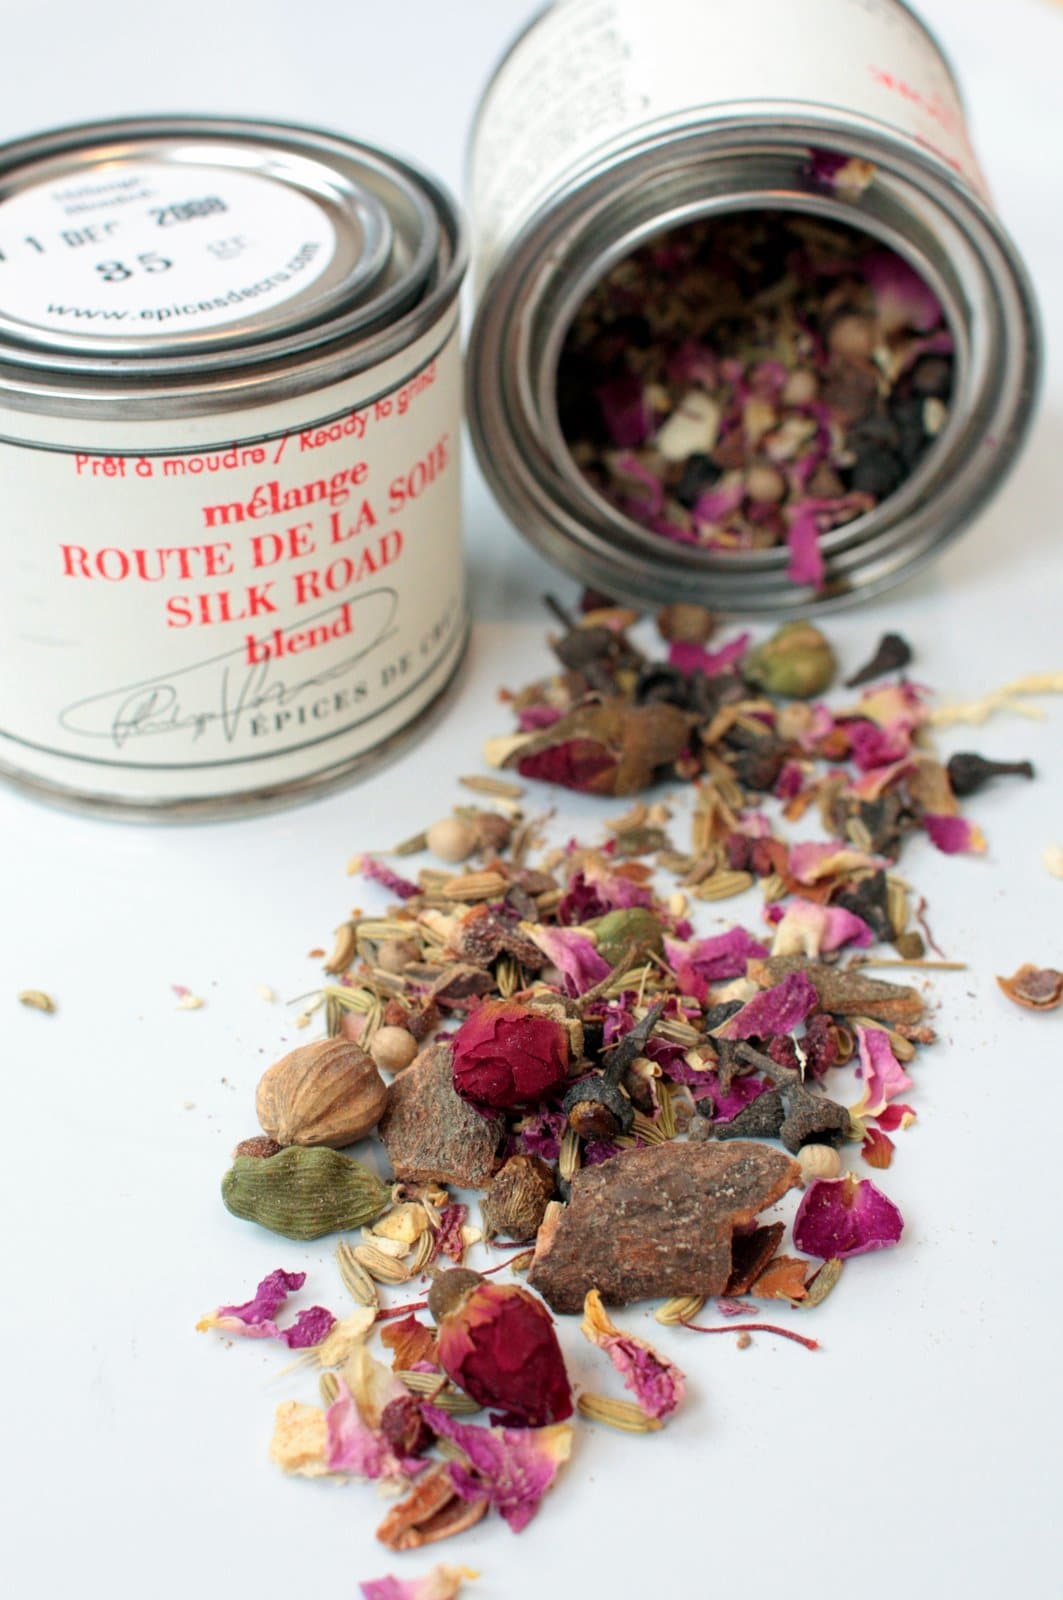 An Indian Film,  A New Spice Blend and a Giveaway